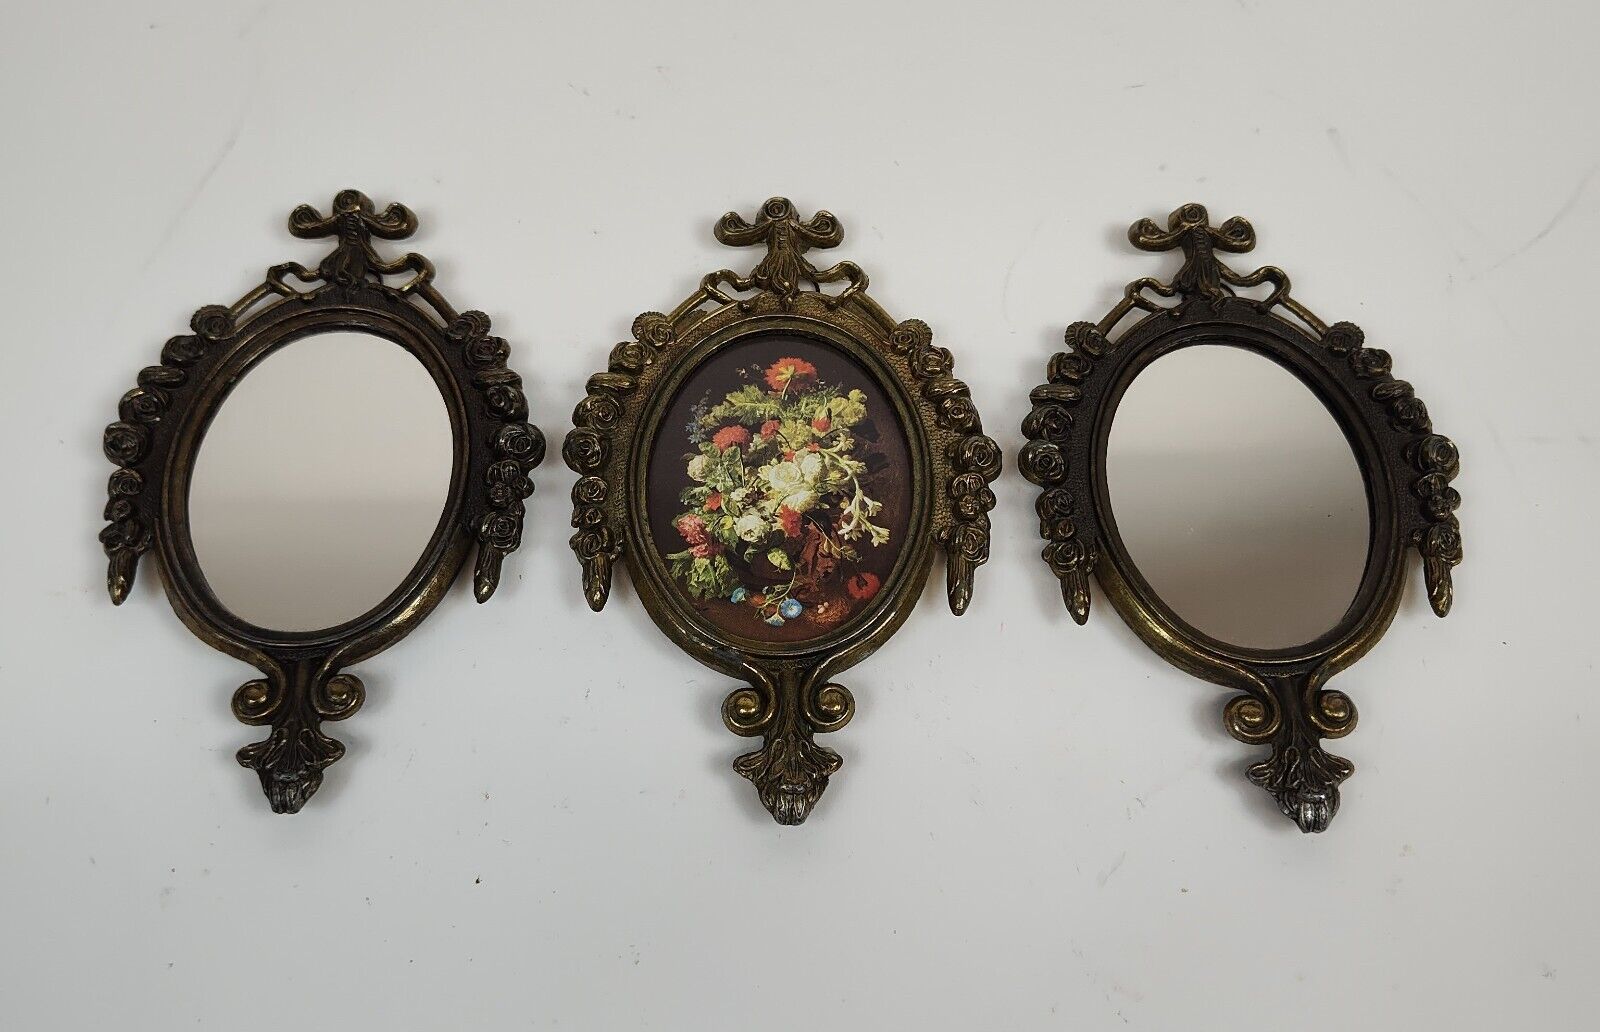 Vintage Ornate Metal Oval Picture Frames Italy MCM Rococo Floral 4x6 Victorian